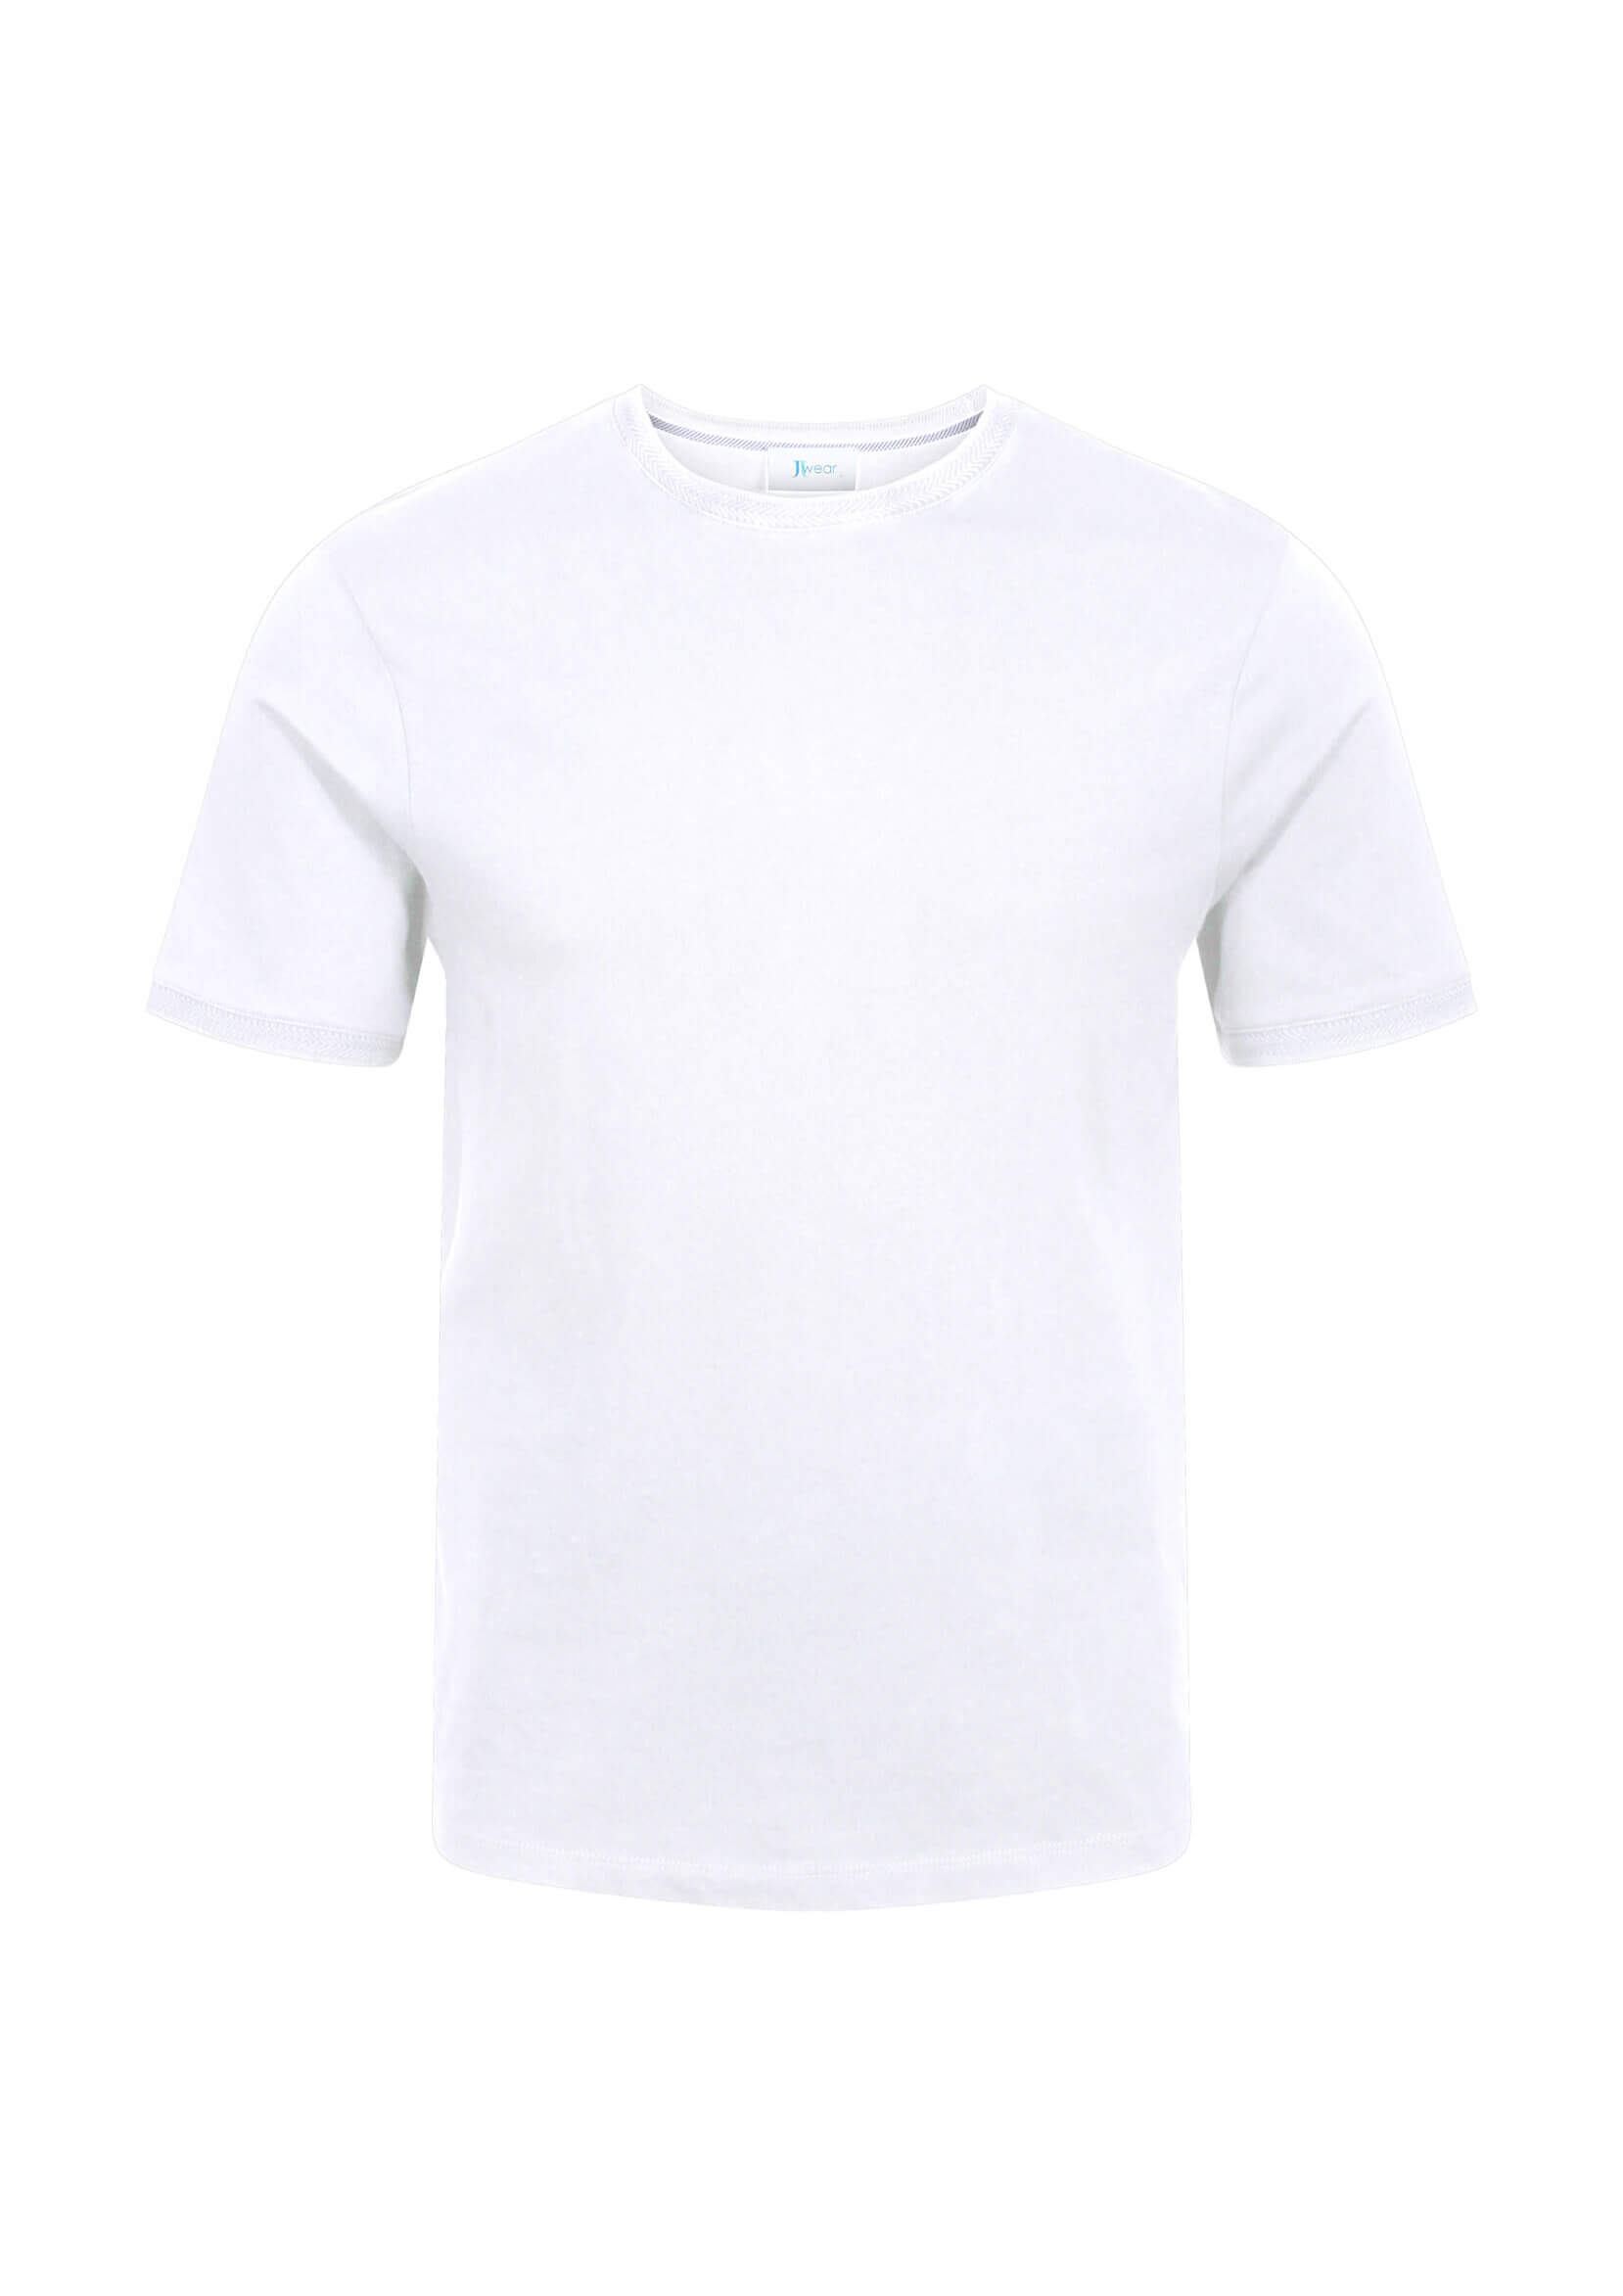 Firth Tee Shirt | Sustainable Hotel Uniforms | J-Wear by Jalin Design